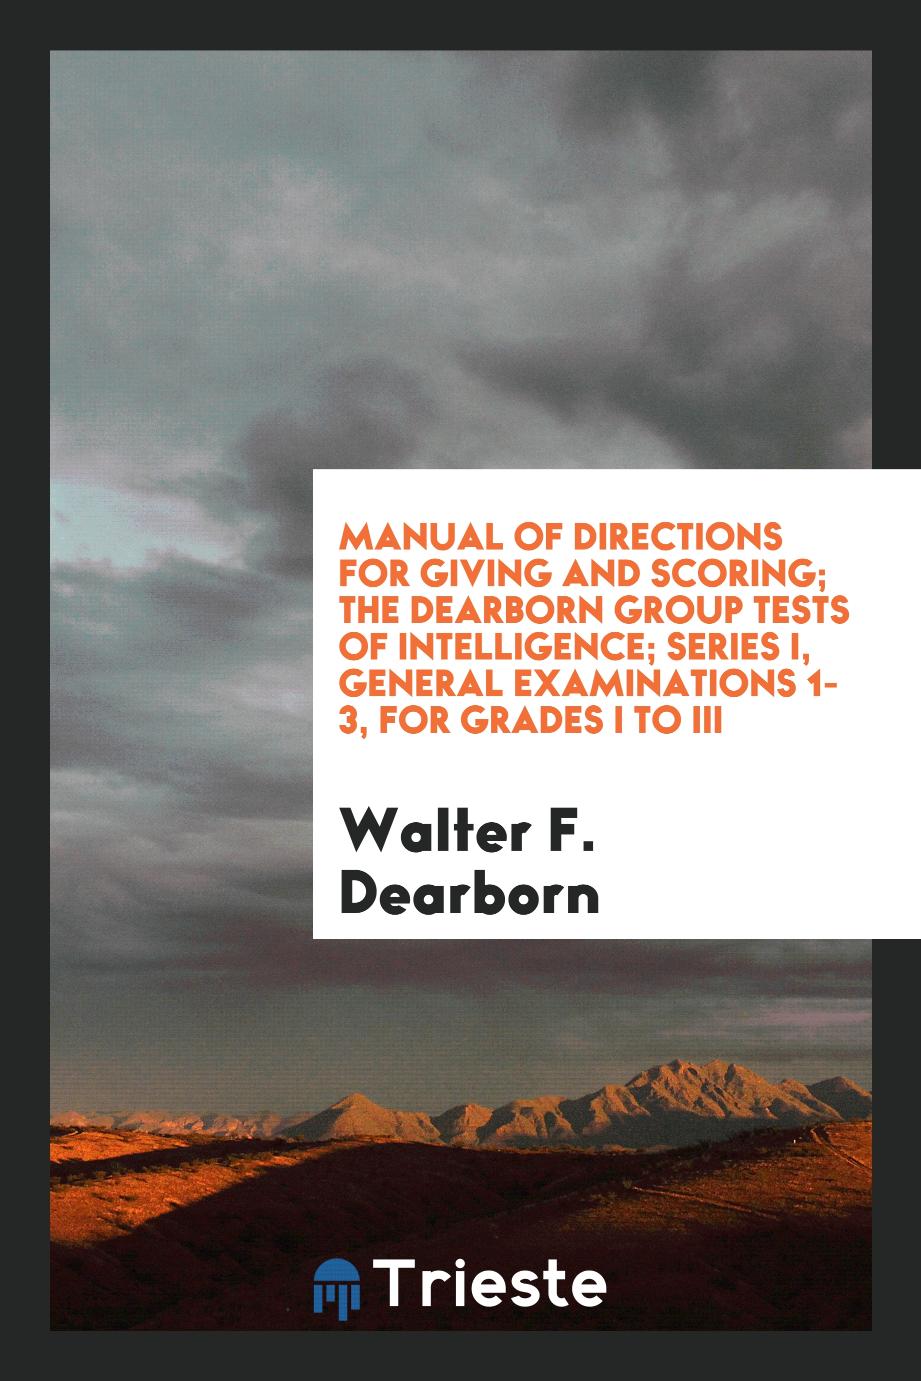 Manual of Directions for Giving and Scoring; The Dearborn Group Tests of Intelligence; Series I, general examinations 1-3, for grades I to III